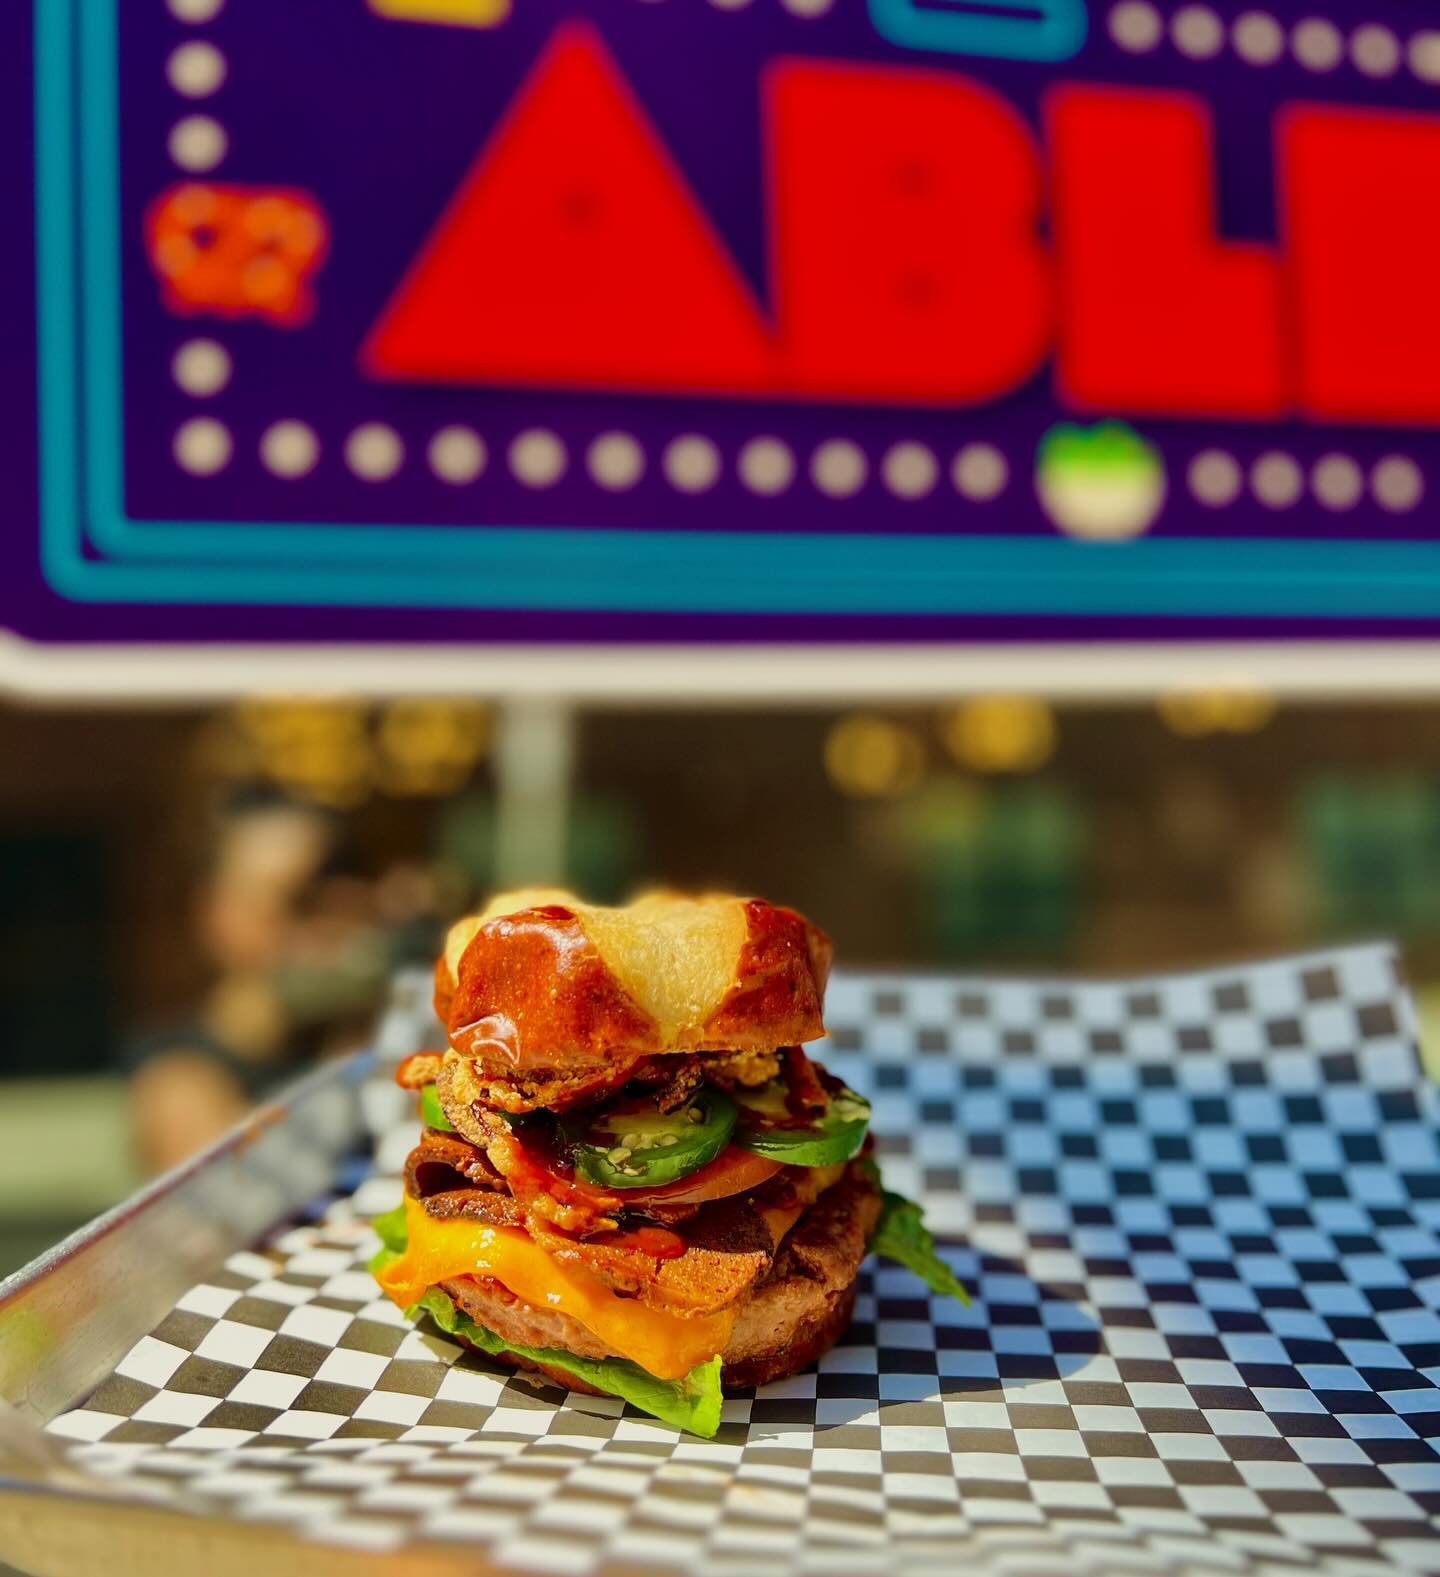 Every Thursday all burgers are $12 with your choice of side and this weeks featured burger special is the Spicy Bacon BBQ! 

Beyond patty topped with cheddar, lettuce, tomato, jalape&ntilde;os, bacon, fried onions and bbq sauce! 

You don&rsquo;t wan